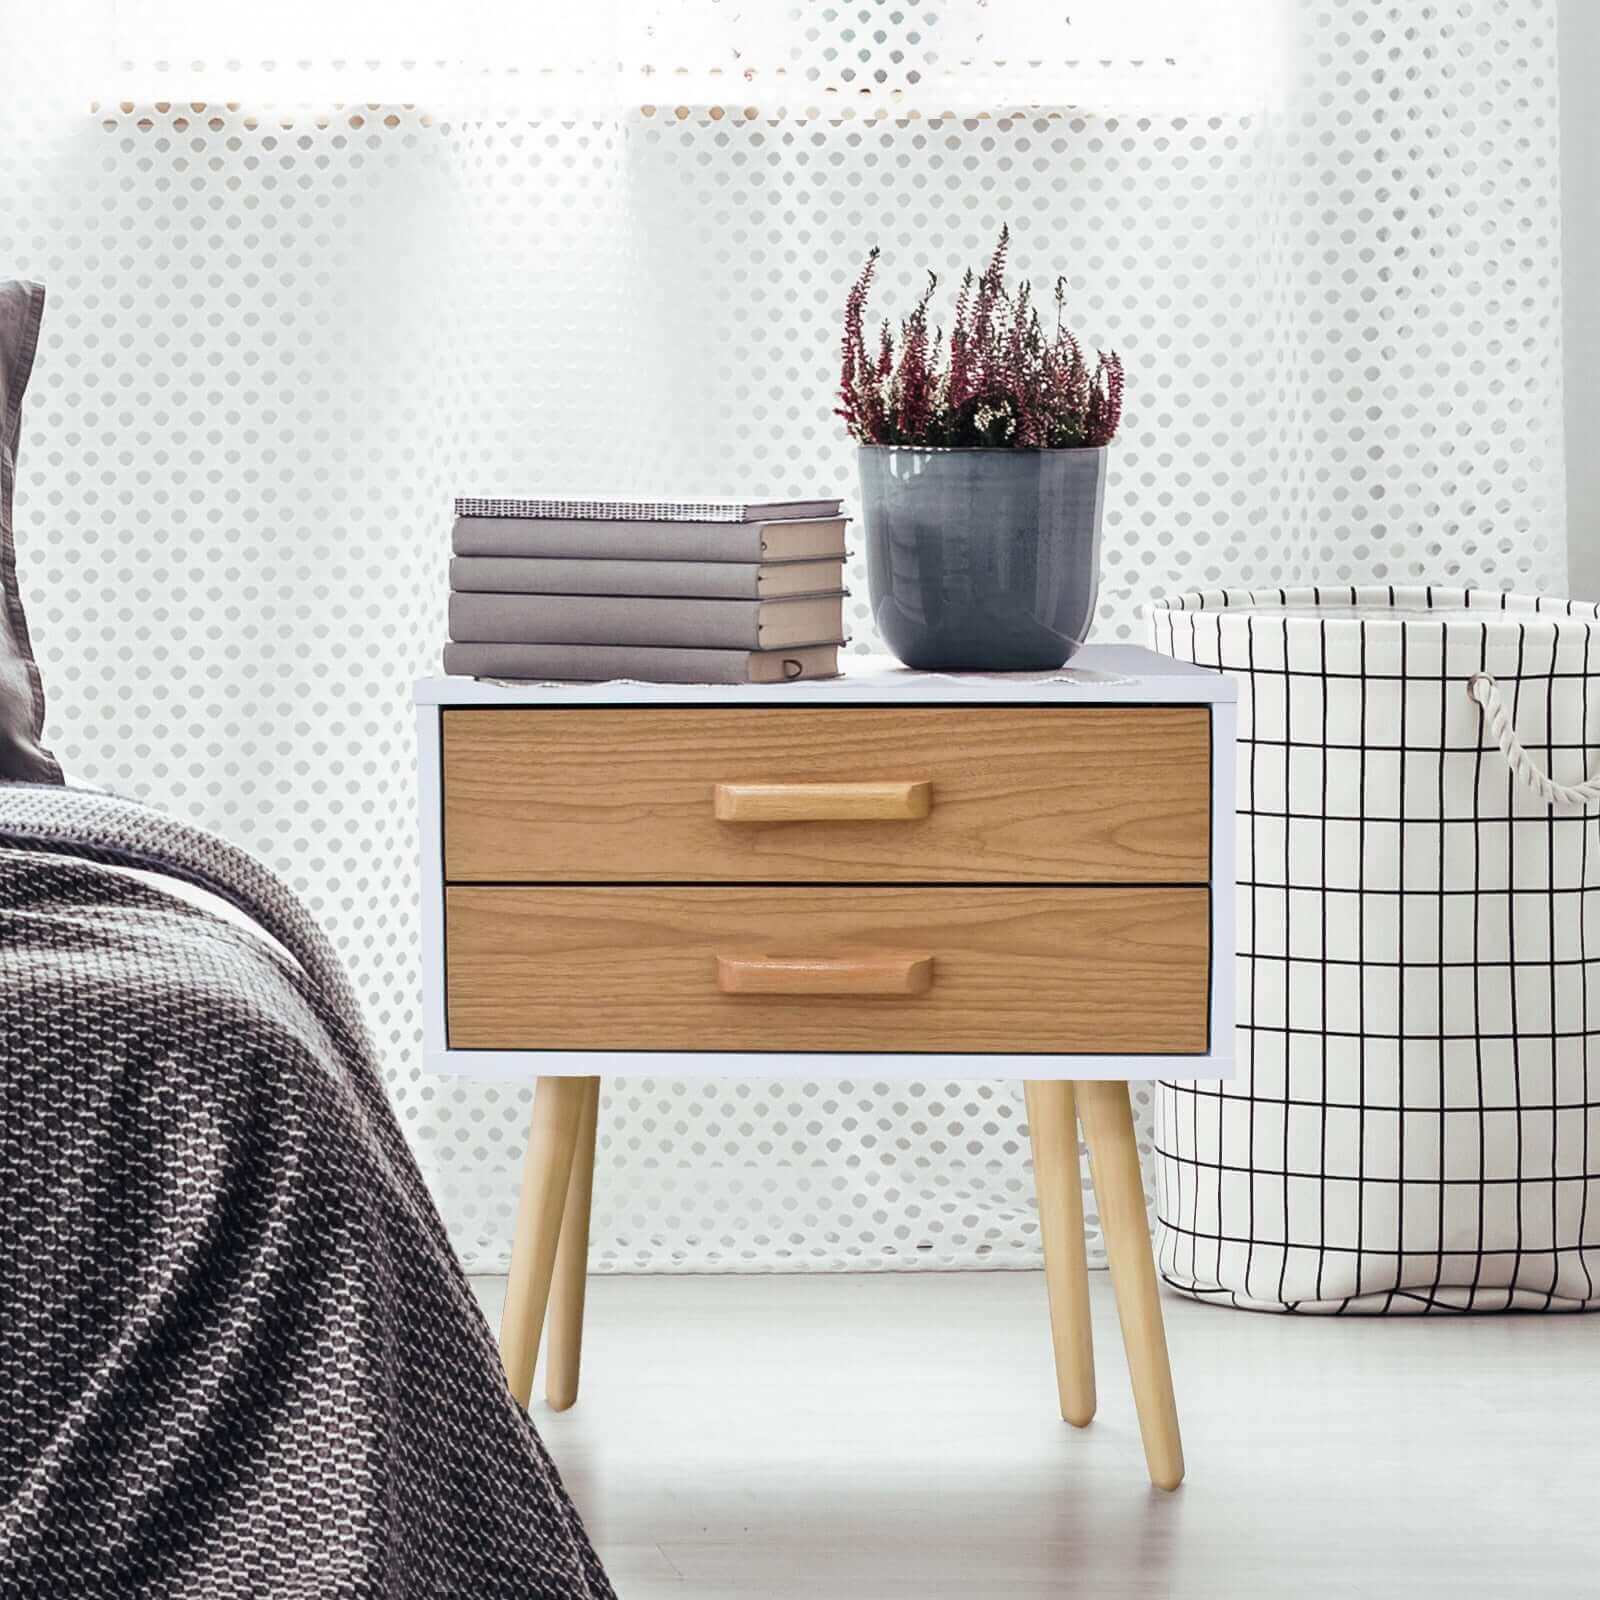 Milano Decor Bedside Table Bronte Drawers Nightstand Unit Cabinet Storage-Upinteriors